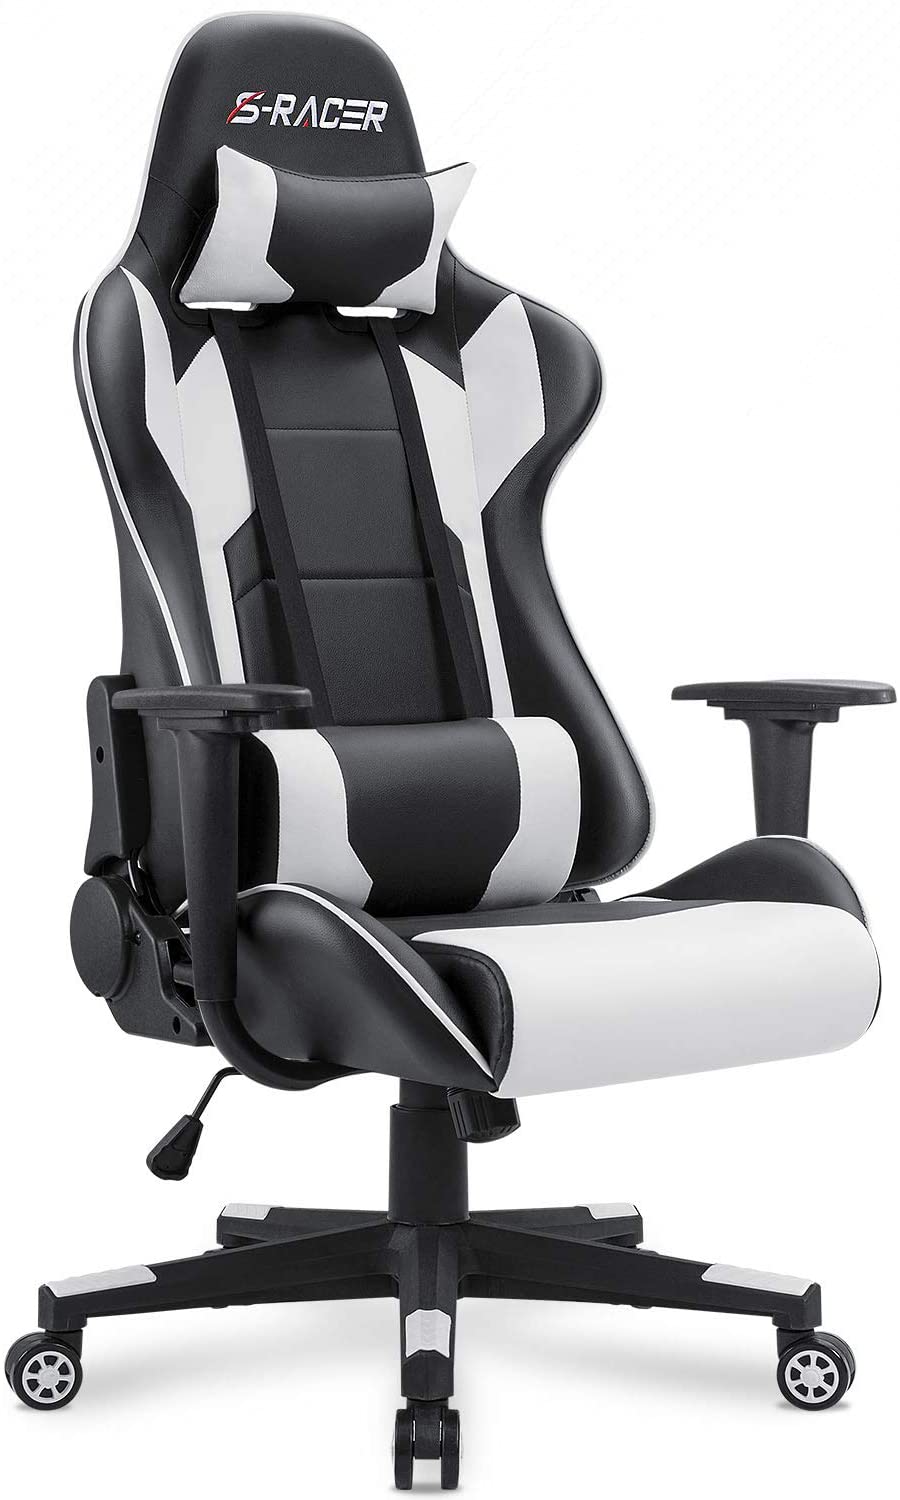 White, with footrest WiiblessU Gaming Chair,Computer Chair Height Adjustable Gaming Chair with 360° Swivel Seat and Headrest for Office or Gaming 